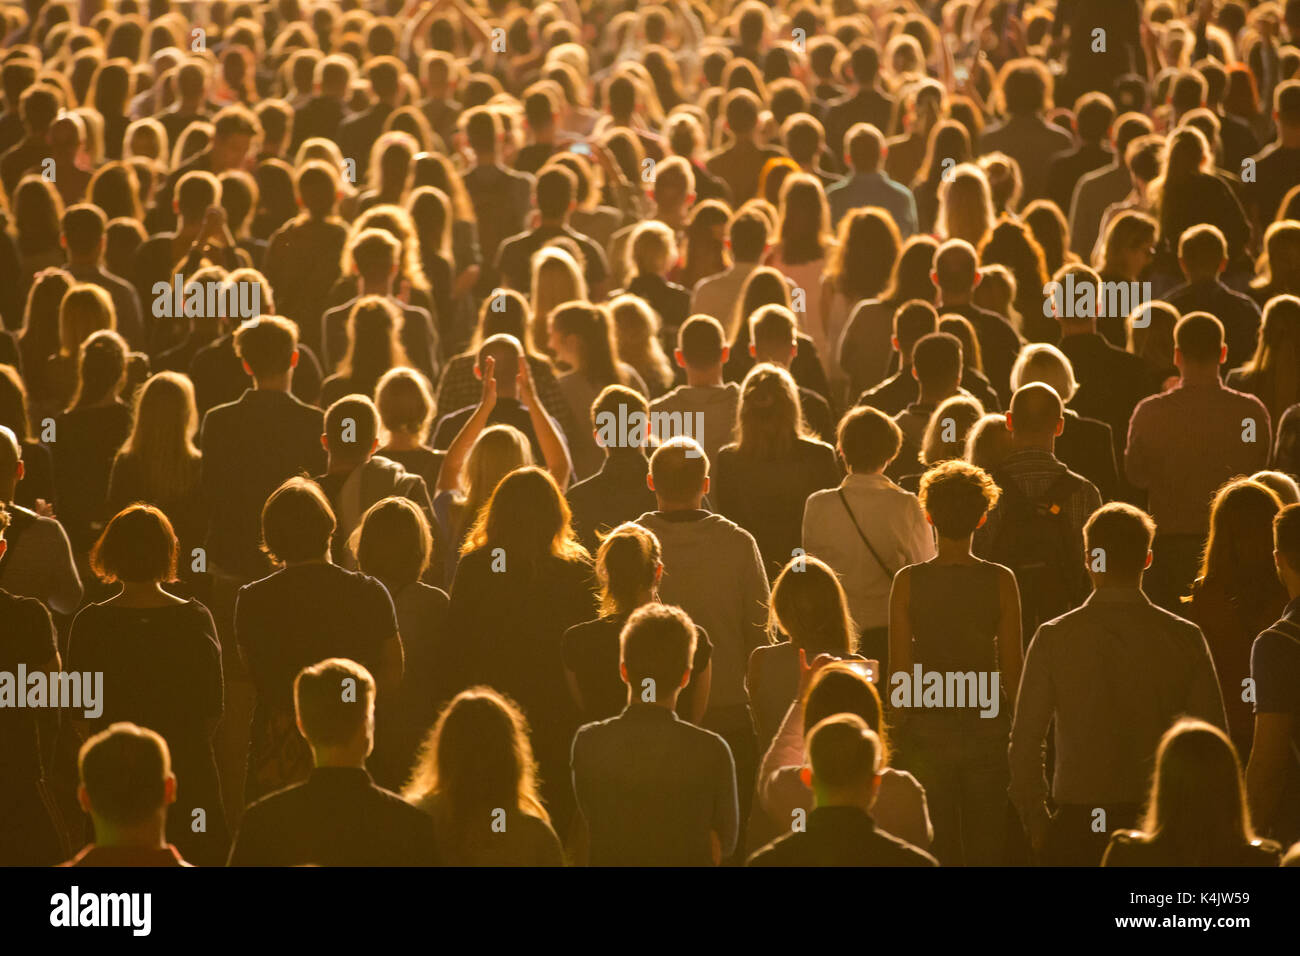 Anonymous crowd of people standing during mass event Stock Photo